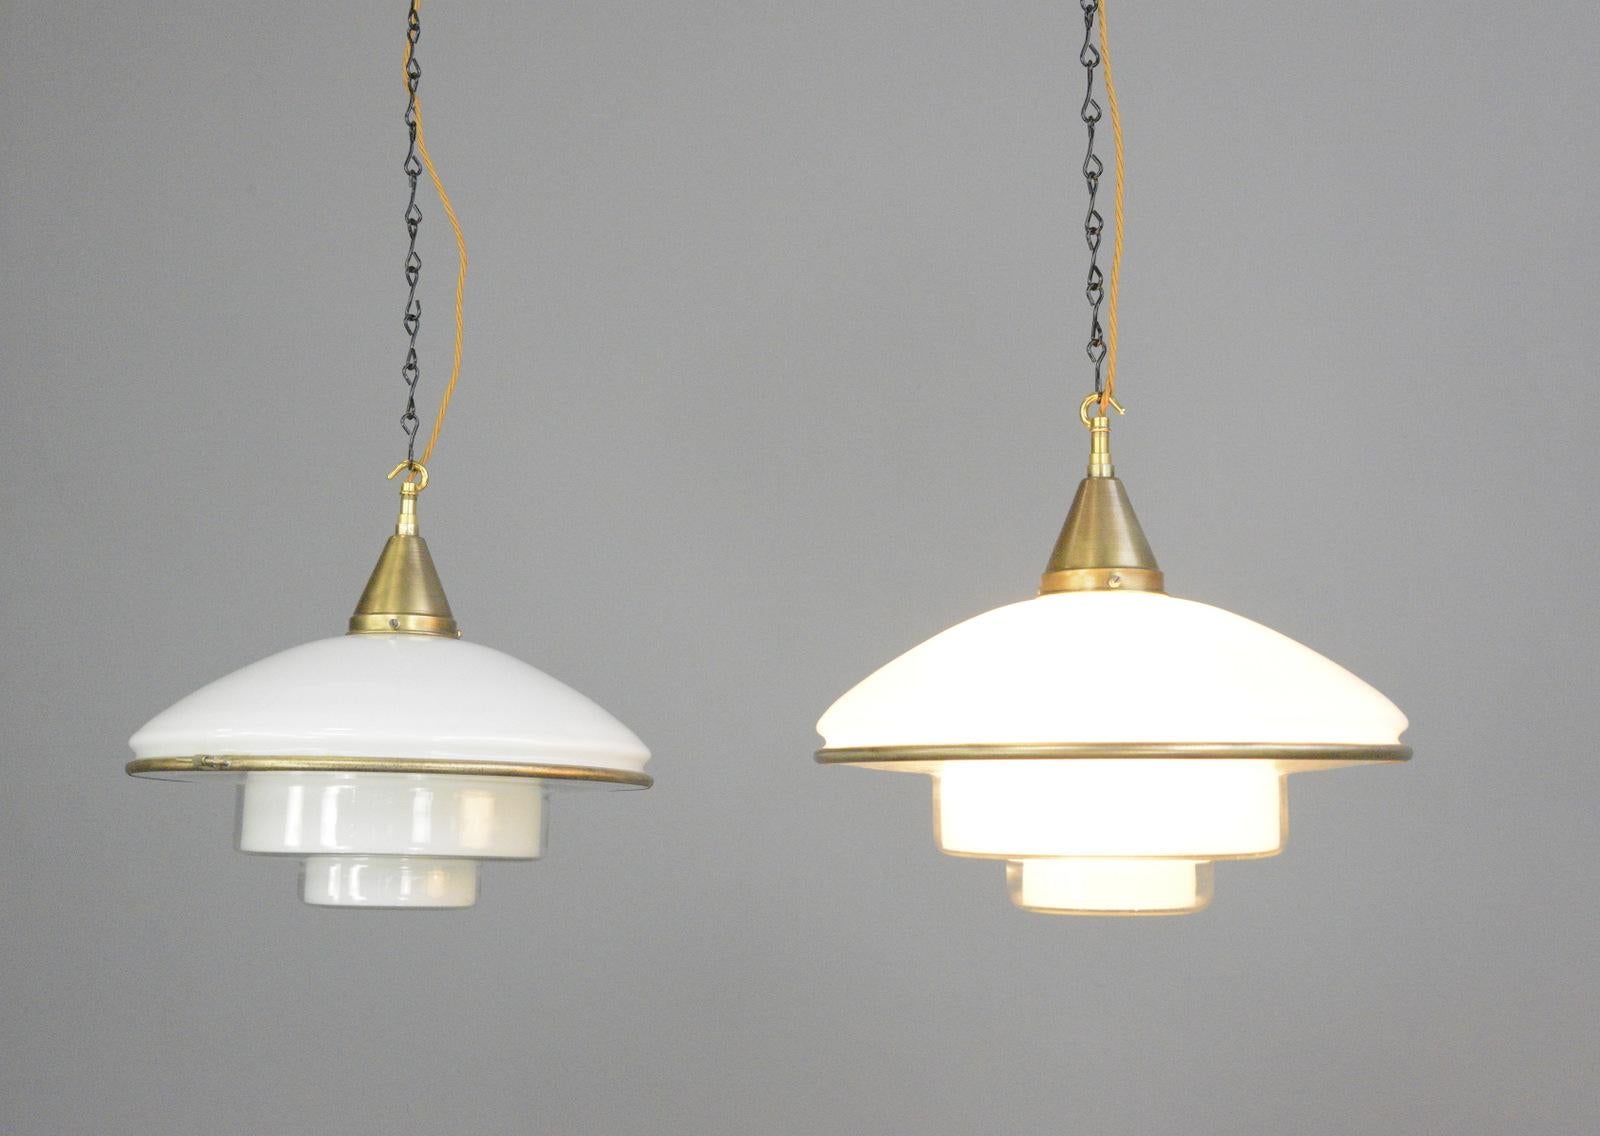 Sistrah P4 pendant lights By Otto Muller Circa 1930s

- Price is per light (8 available)
- Original brass gallery
- Comes with original ceiling rose
- Comes with 100cm of cable and chain
- Opaline glass top with stepped glass base
- Takes E27